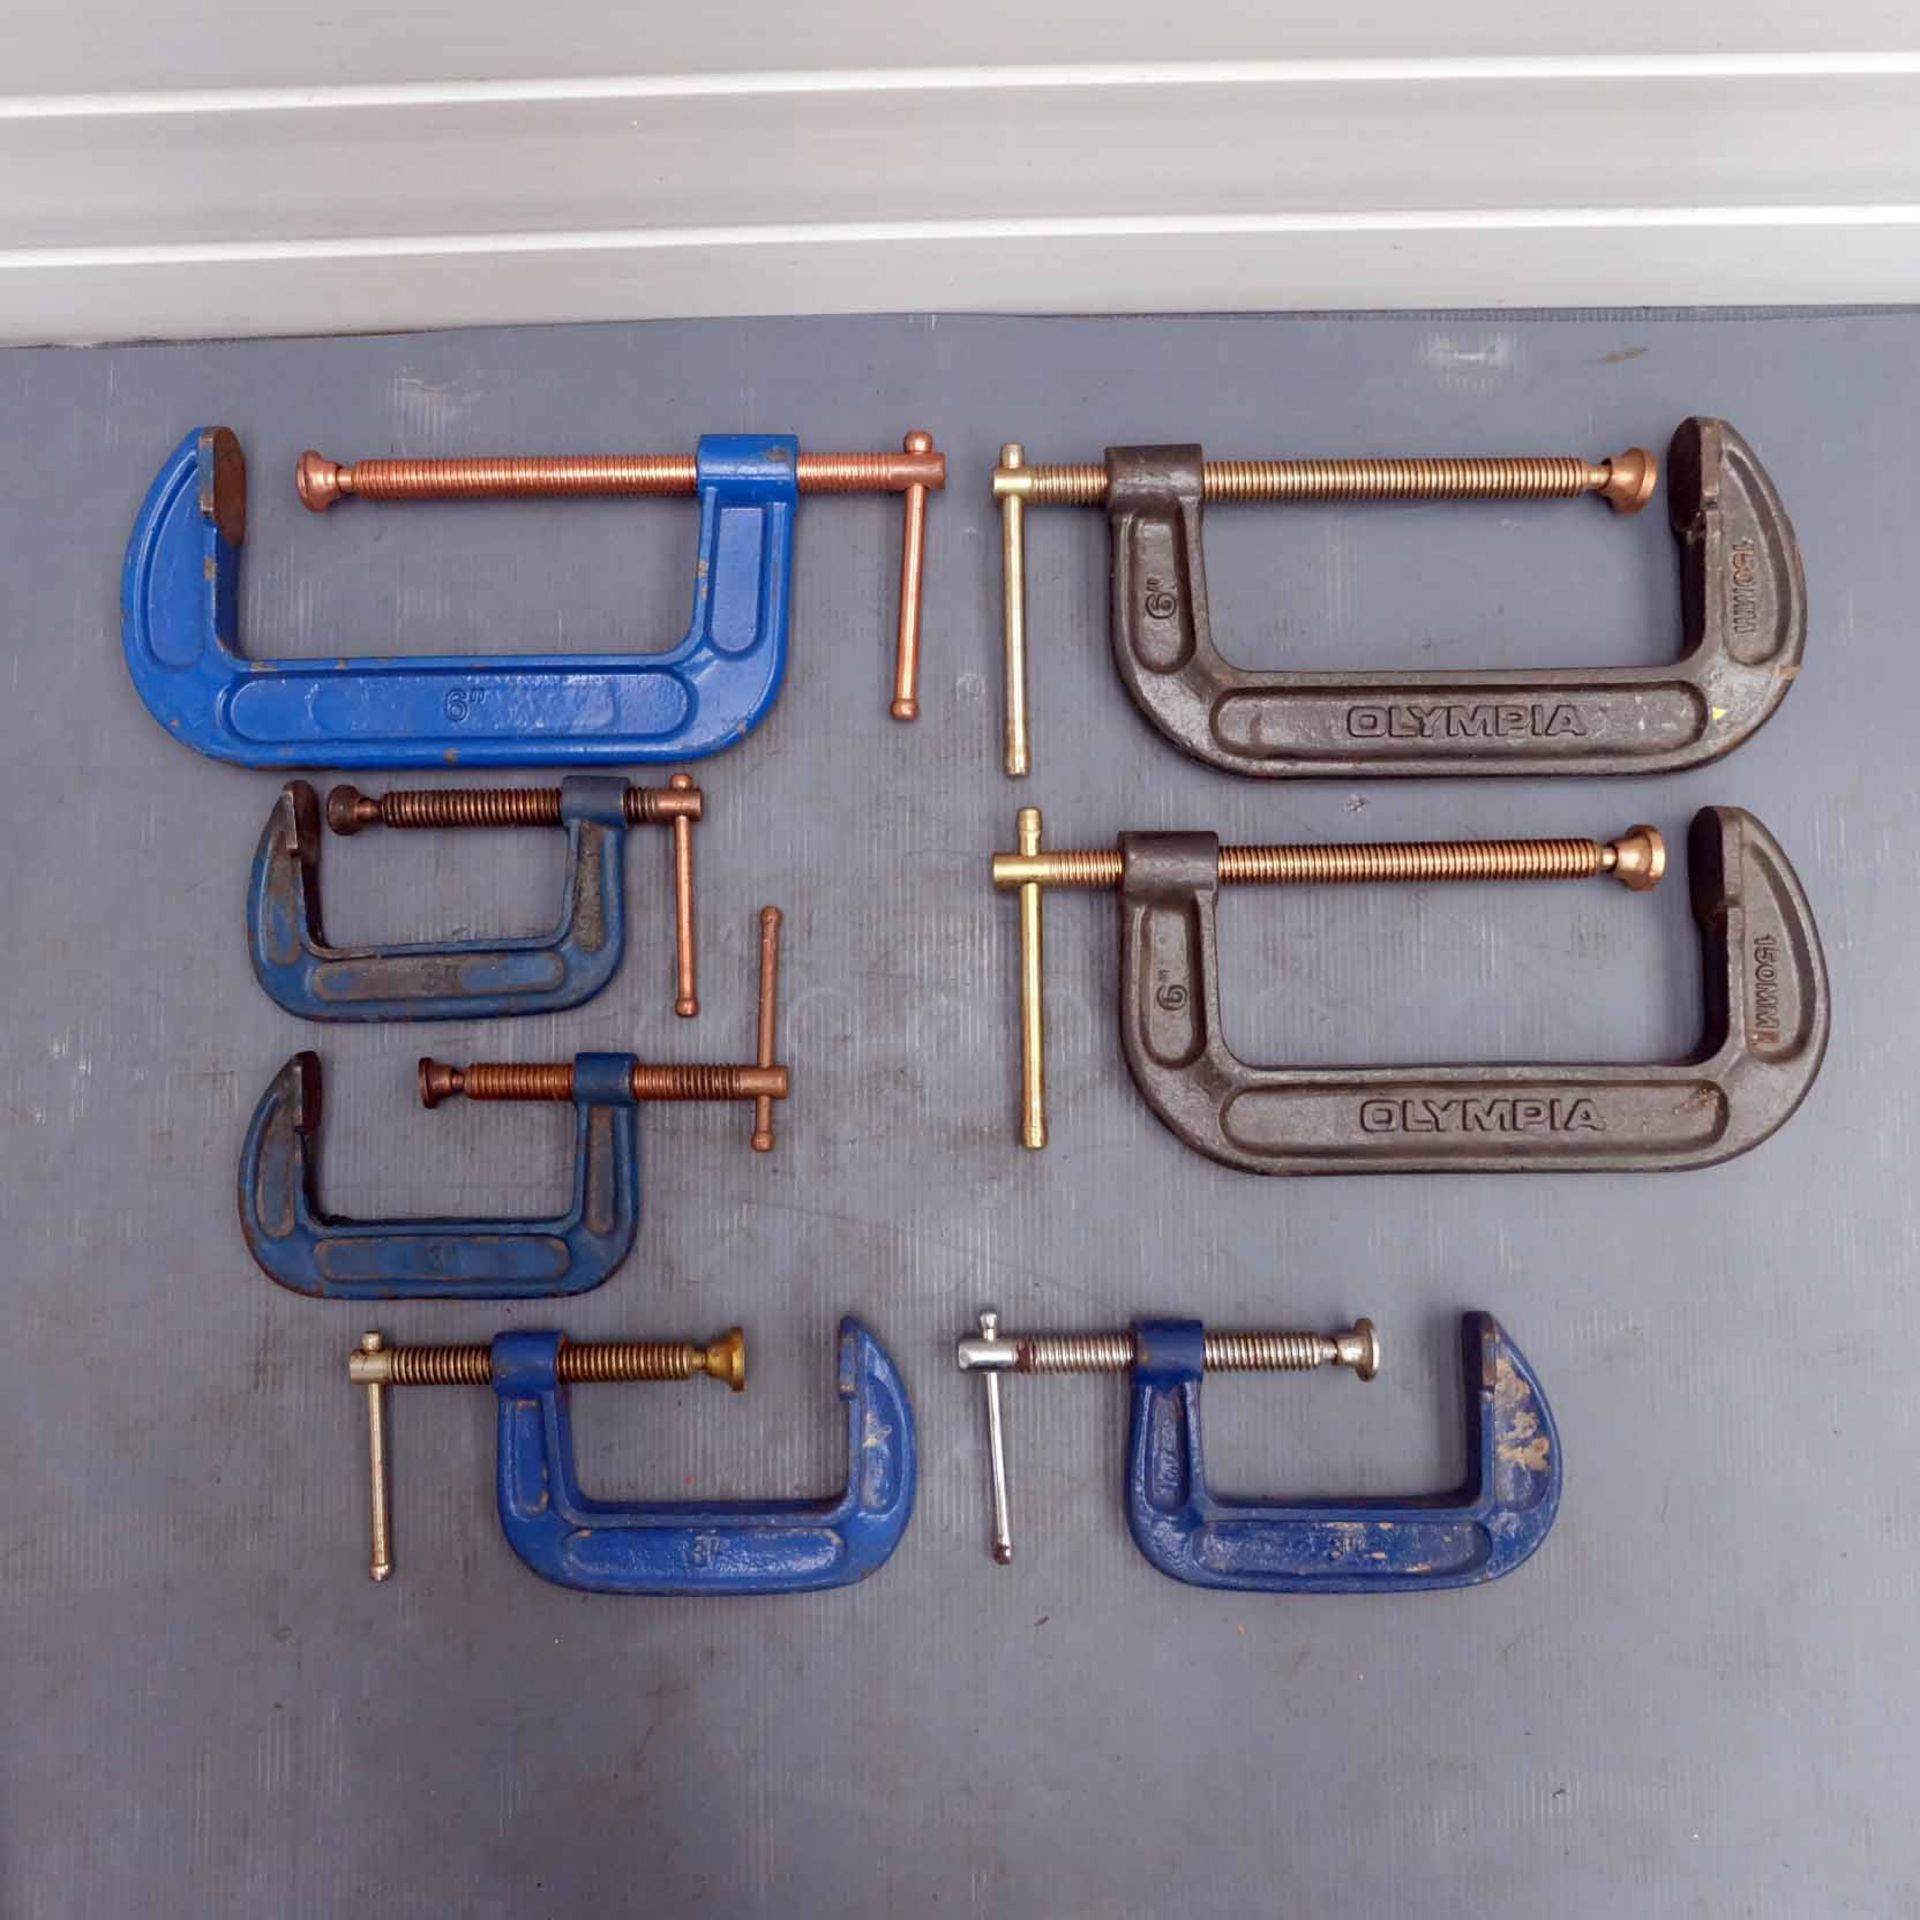 Quantity of 7 'G' Clamps. Includes 4 x 3" and 3 x 6".